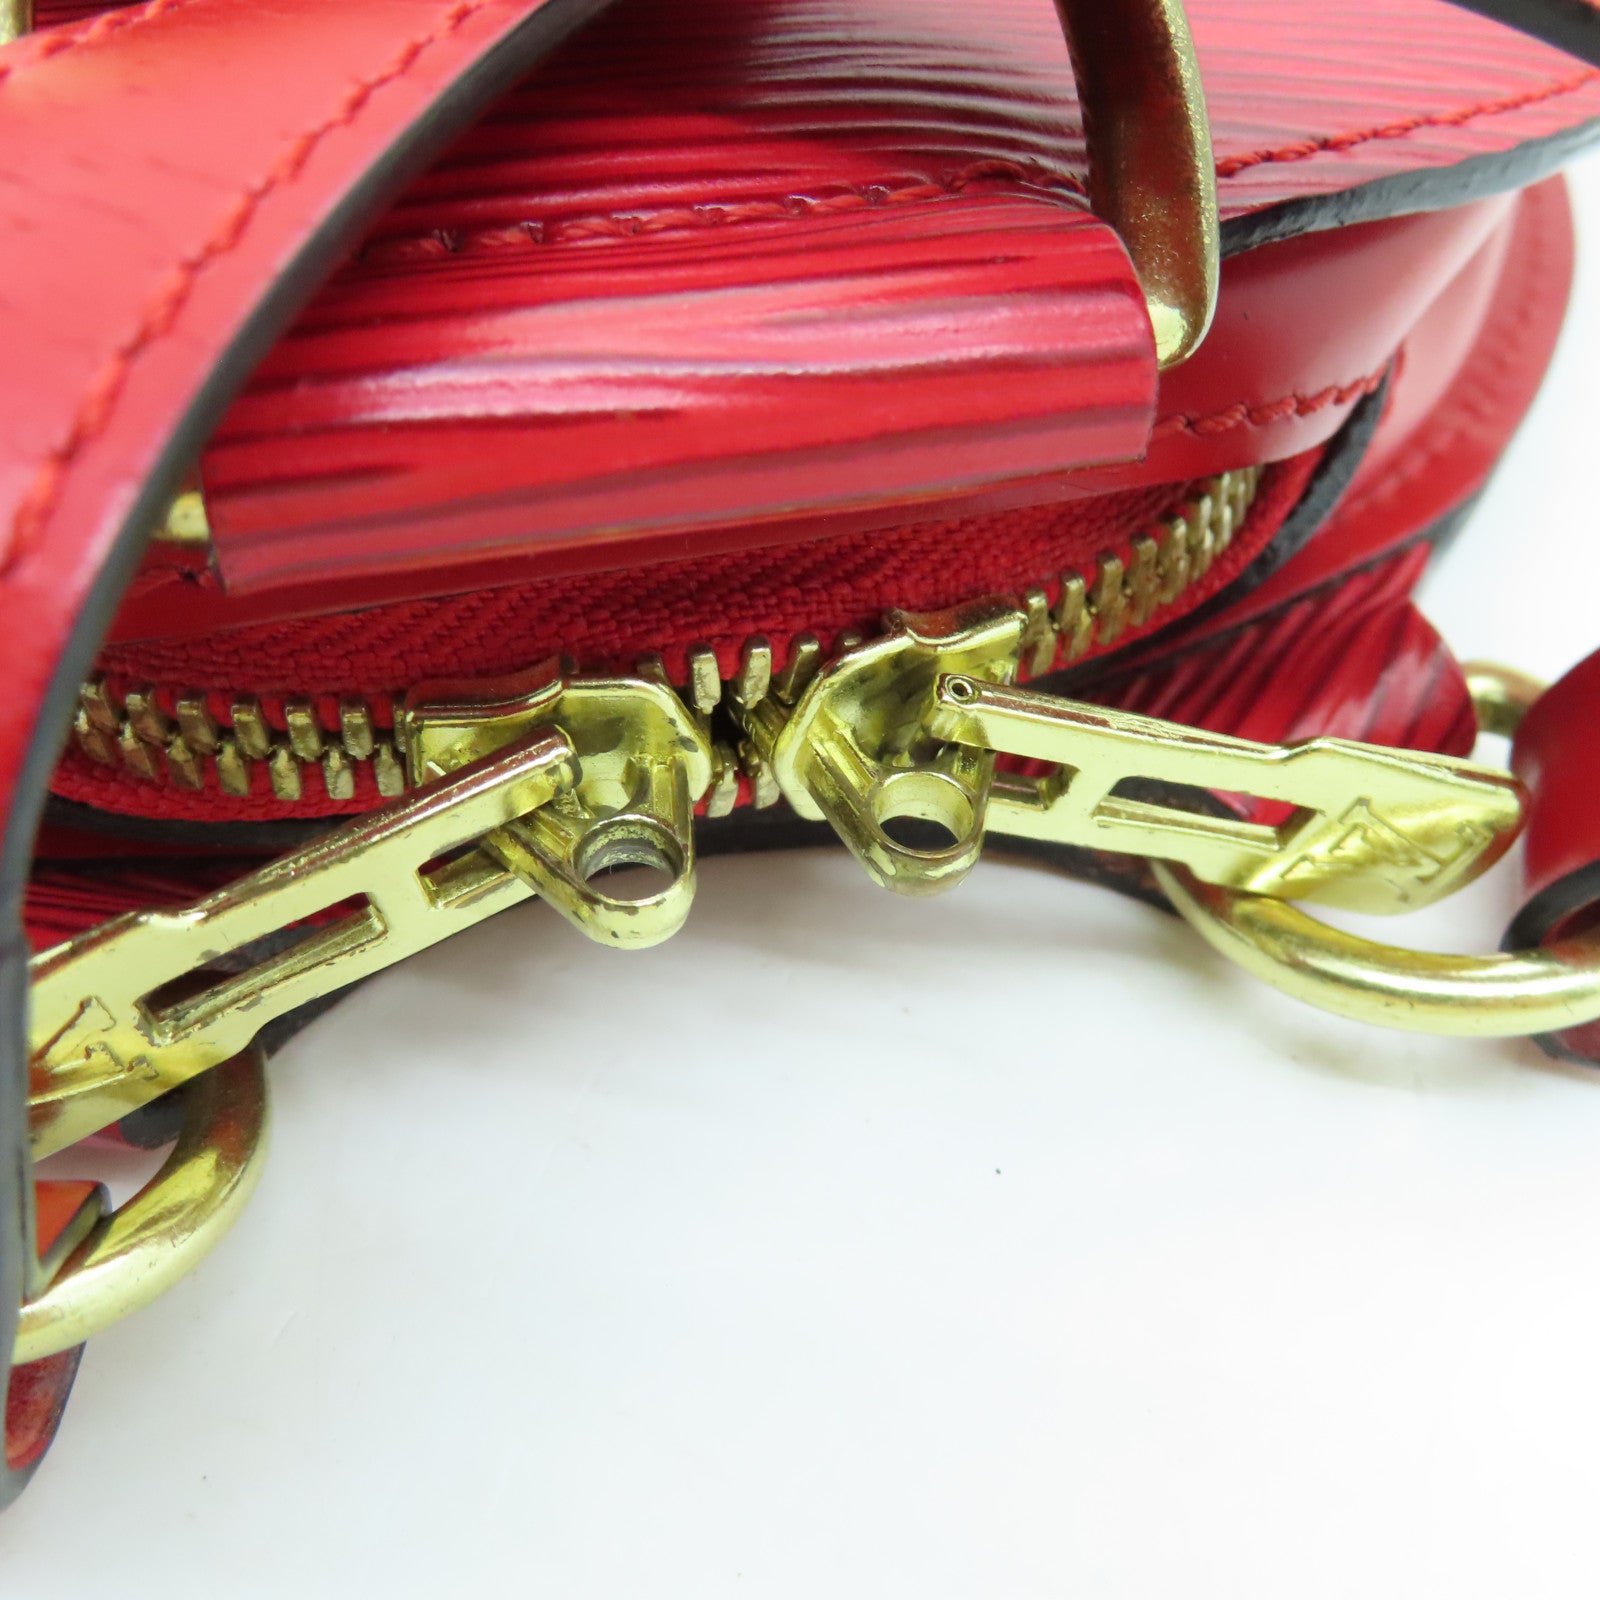 LOUIS VUITTON Epi Mabillon Back Pack gold buckle backpack red – Brand Off  Hong Kong Online Store